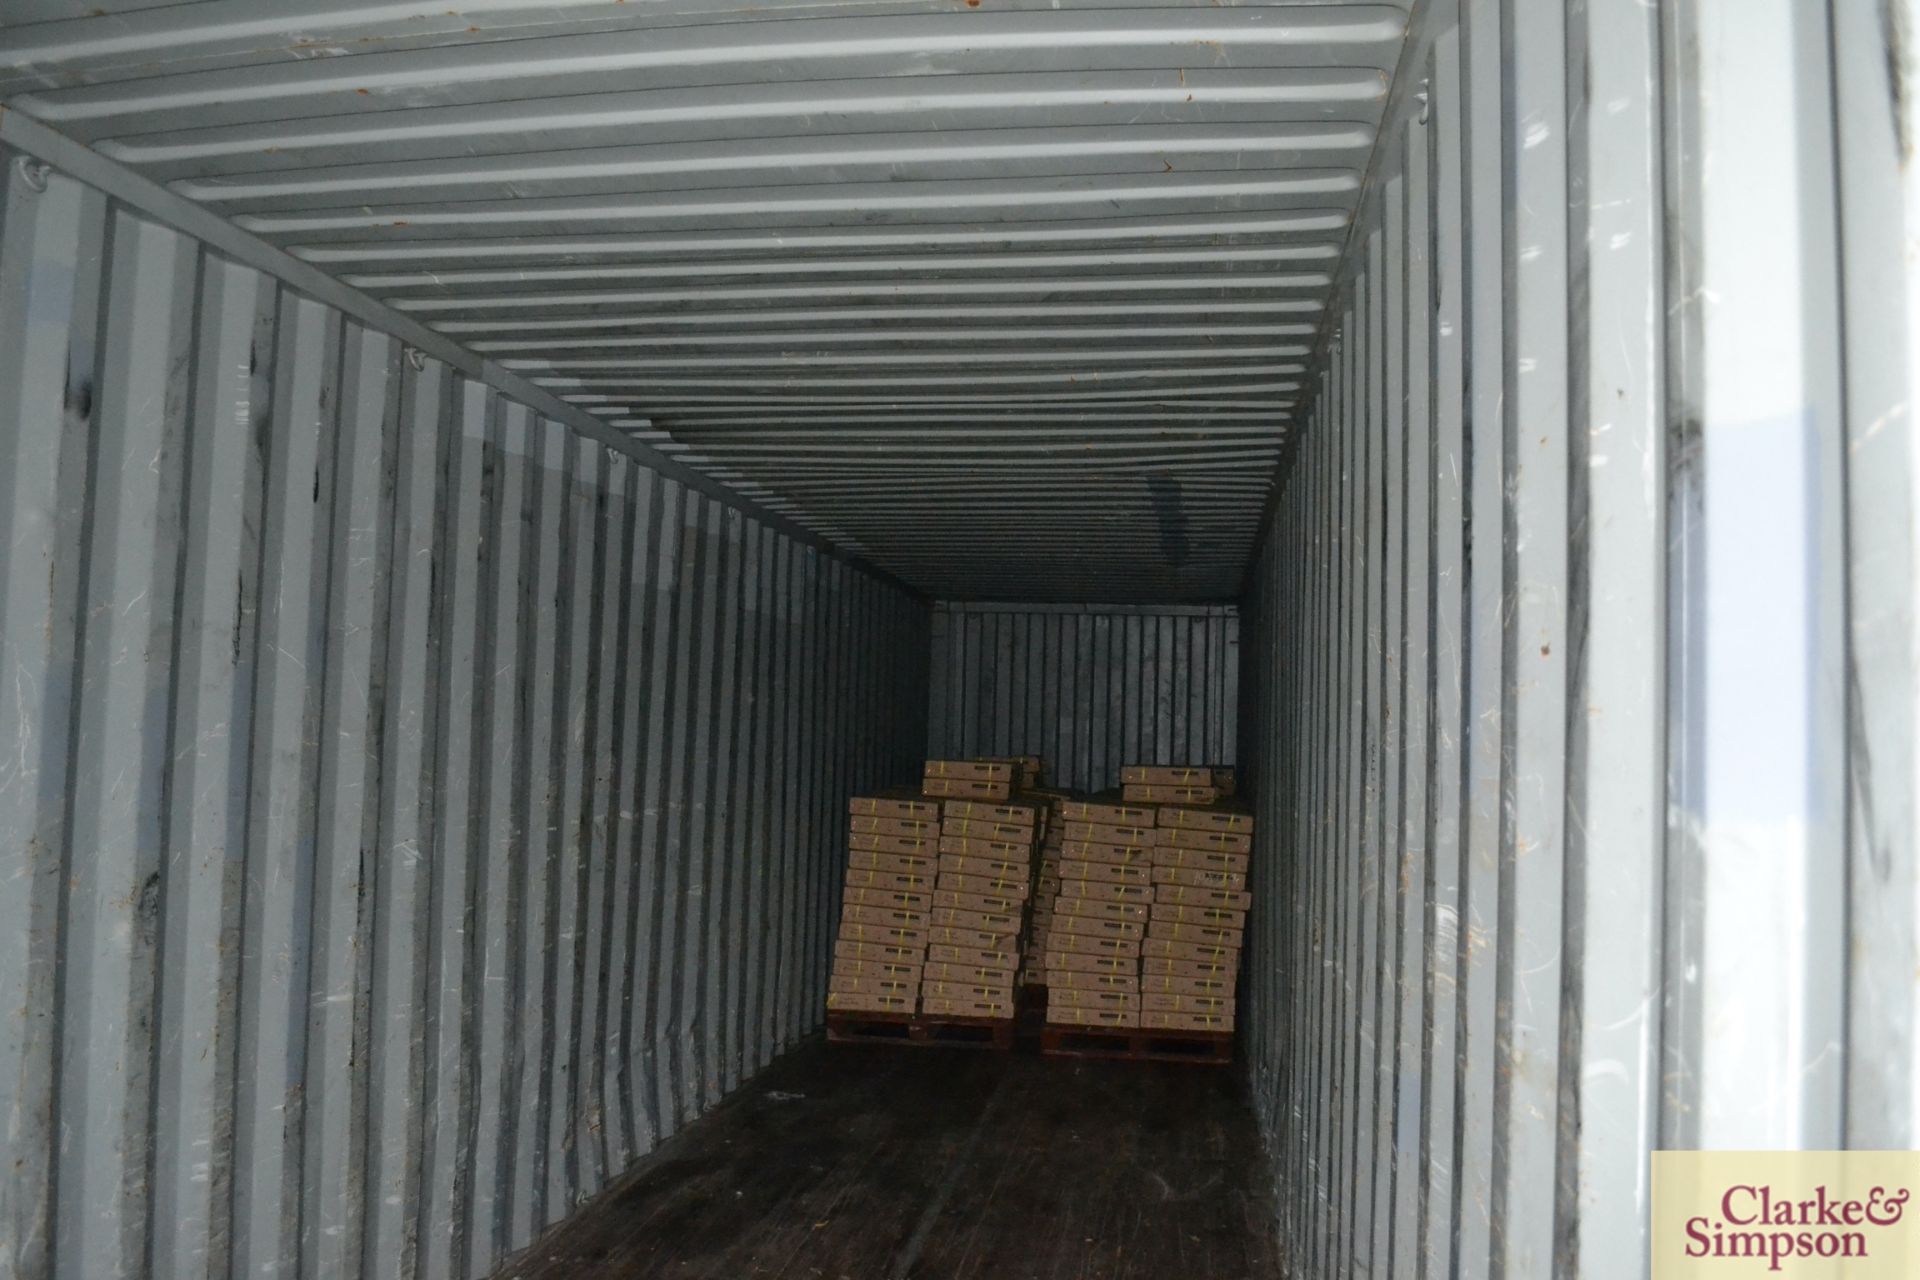 40ft shipping container. 2003. To be sold in situ and removed at purchaser's expense. - Image 5 of 7